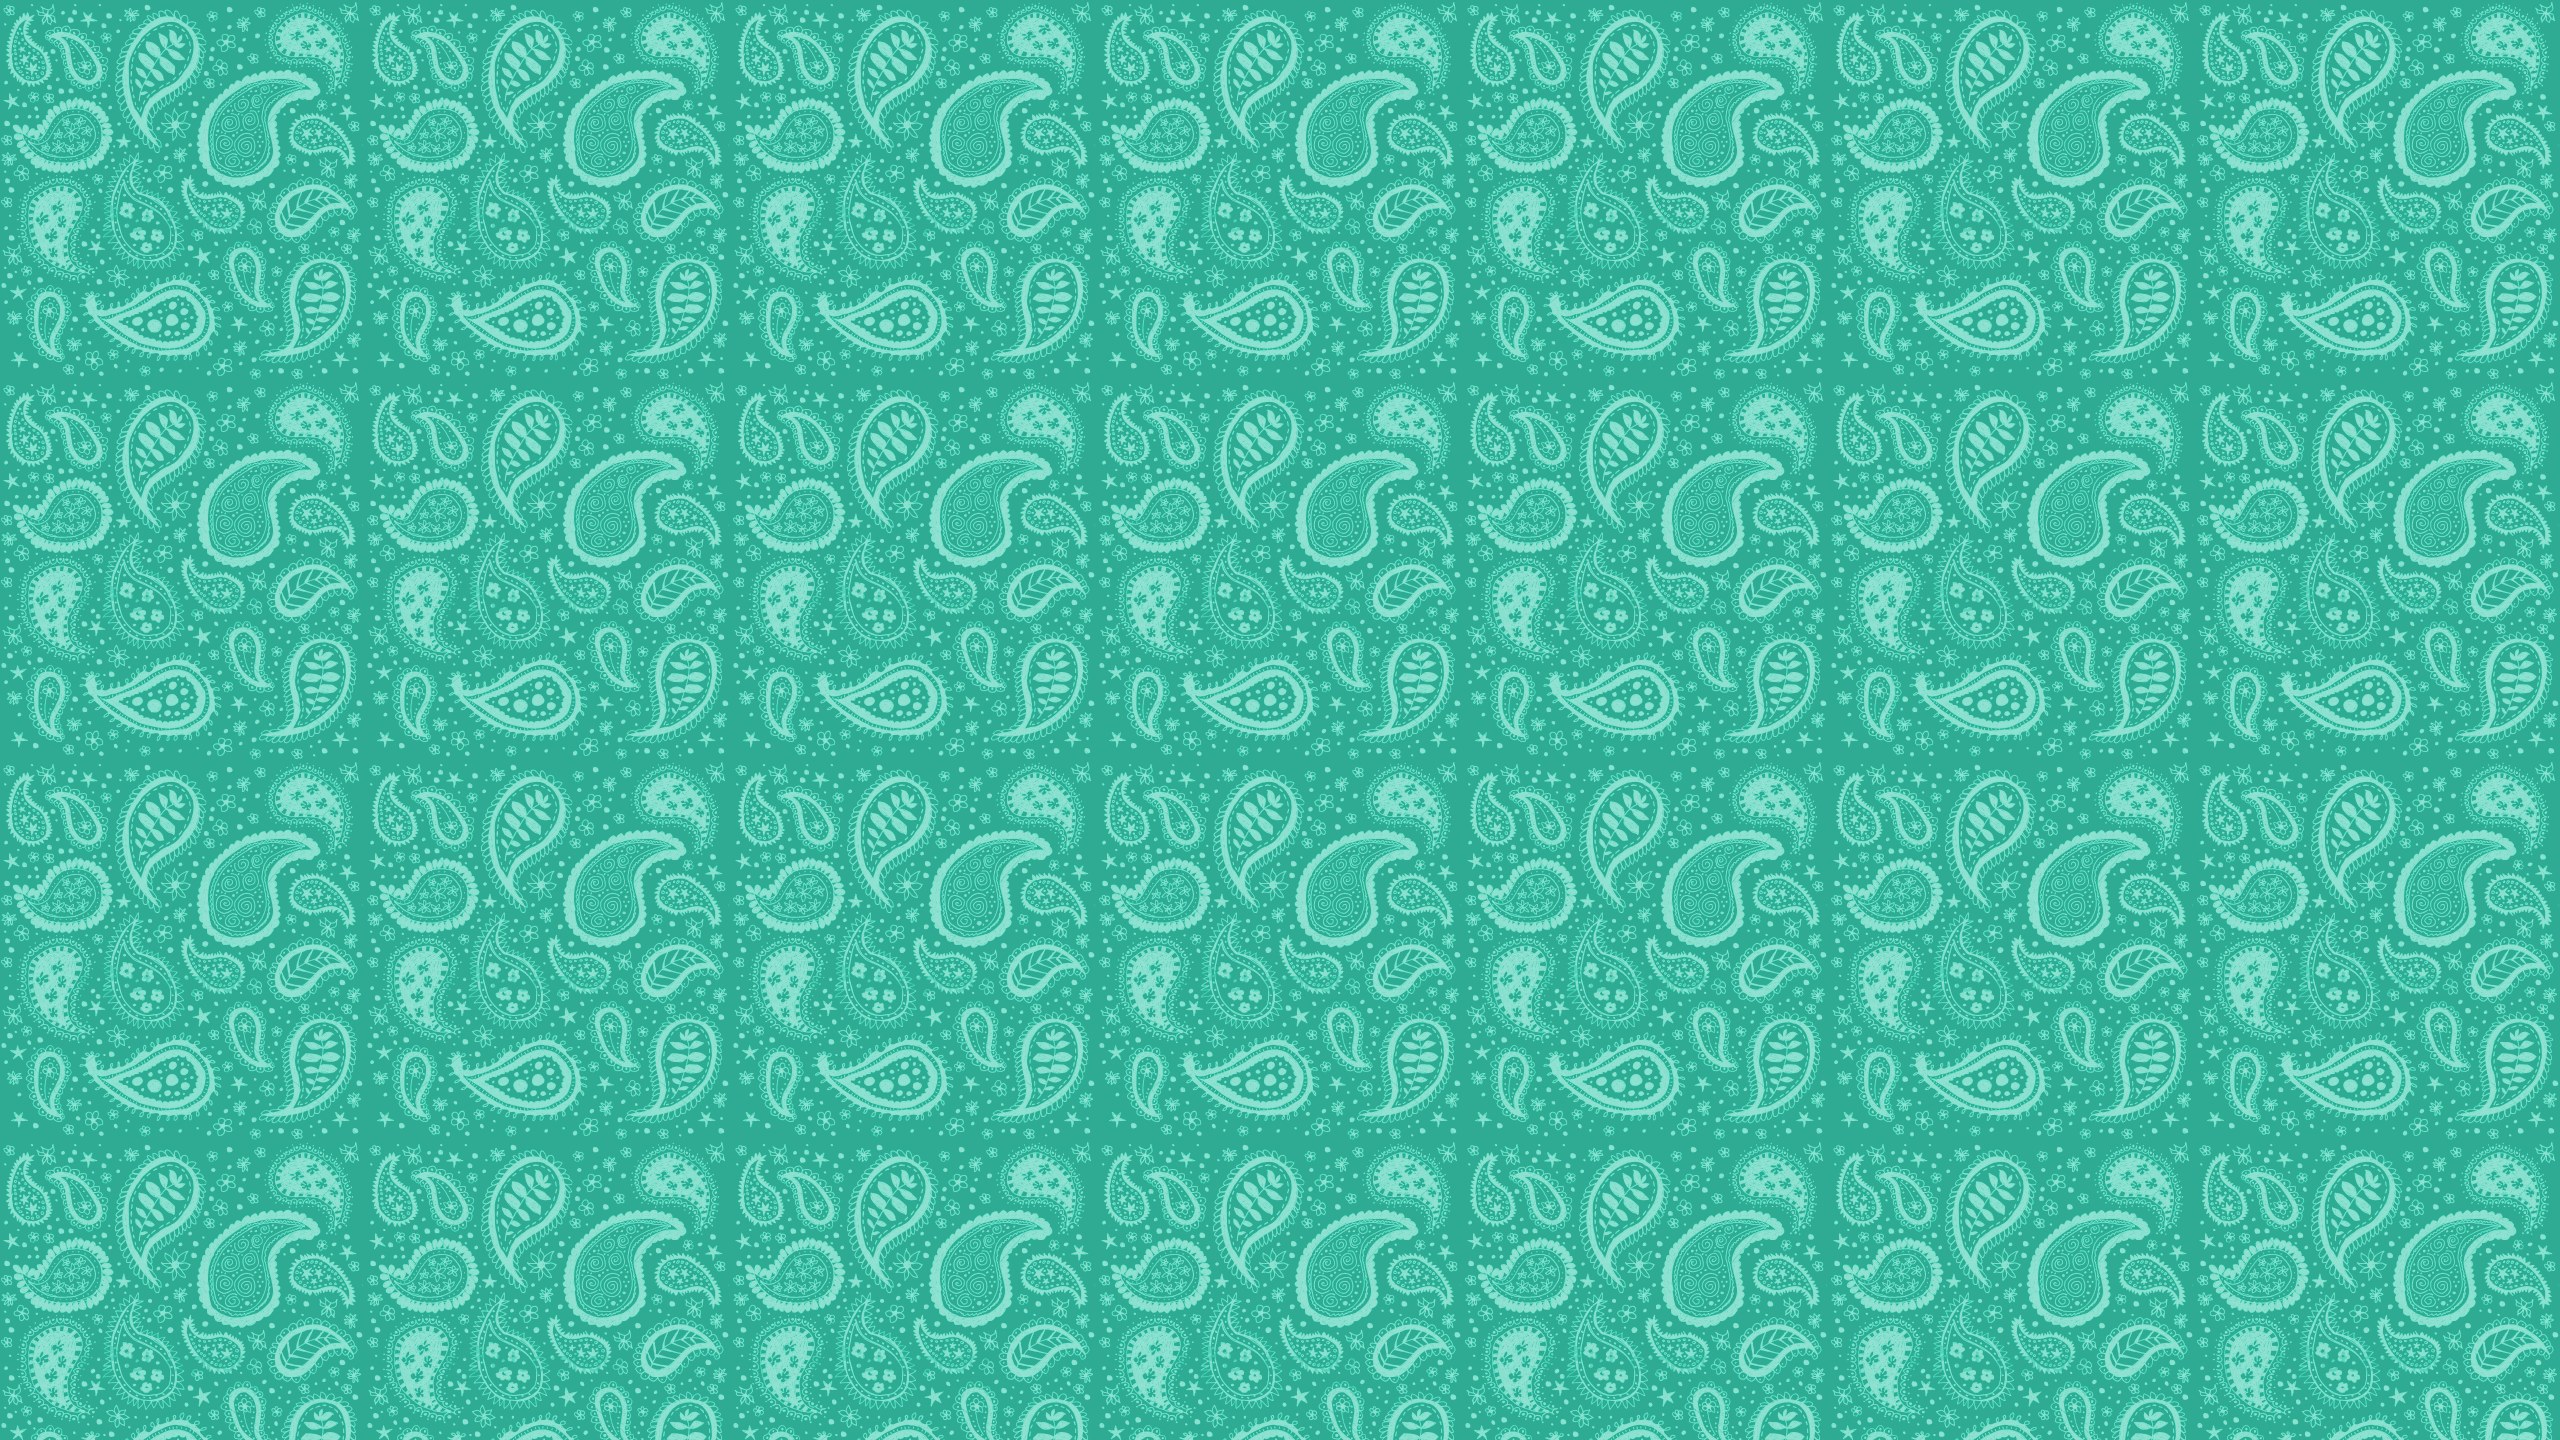 This Teal Paisley Desktop Wallpaper Is Easy Just Save The